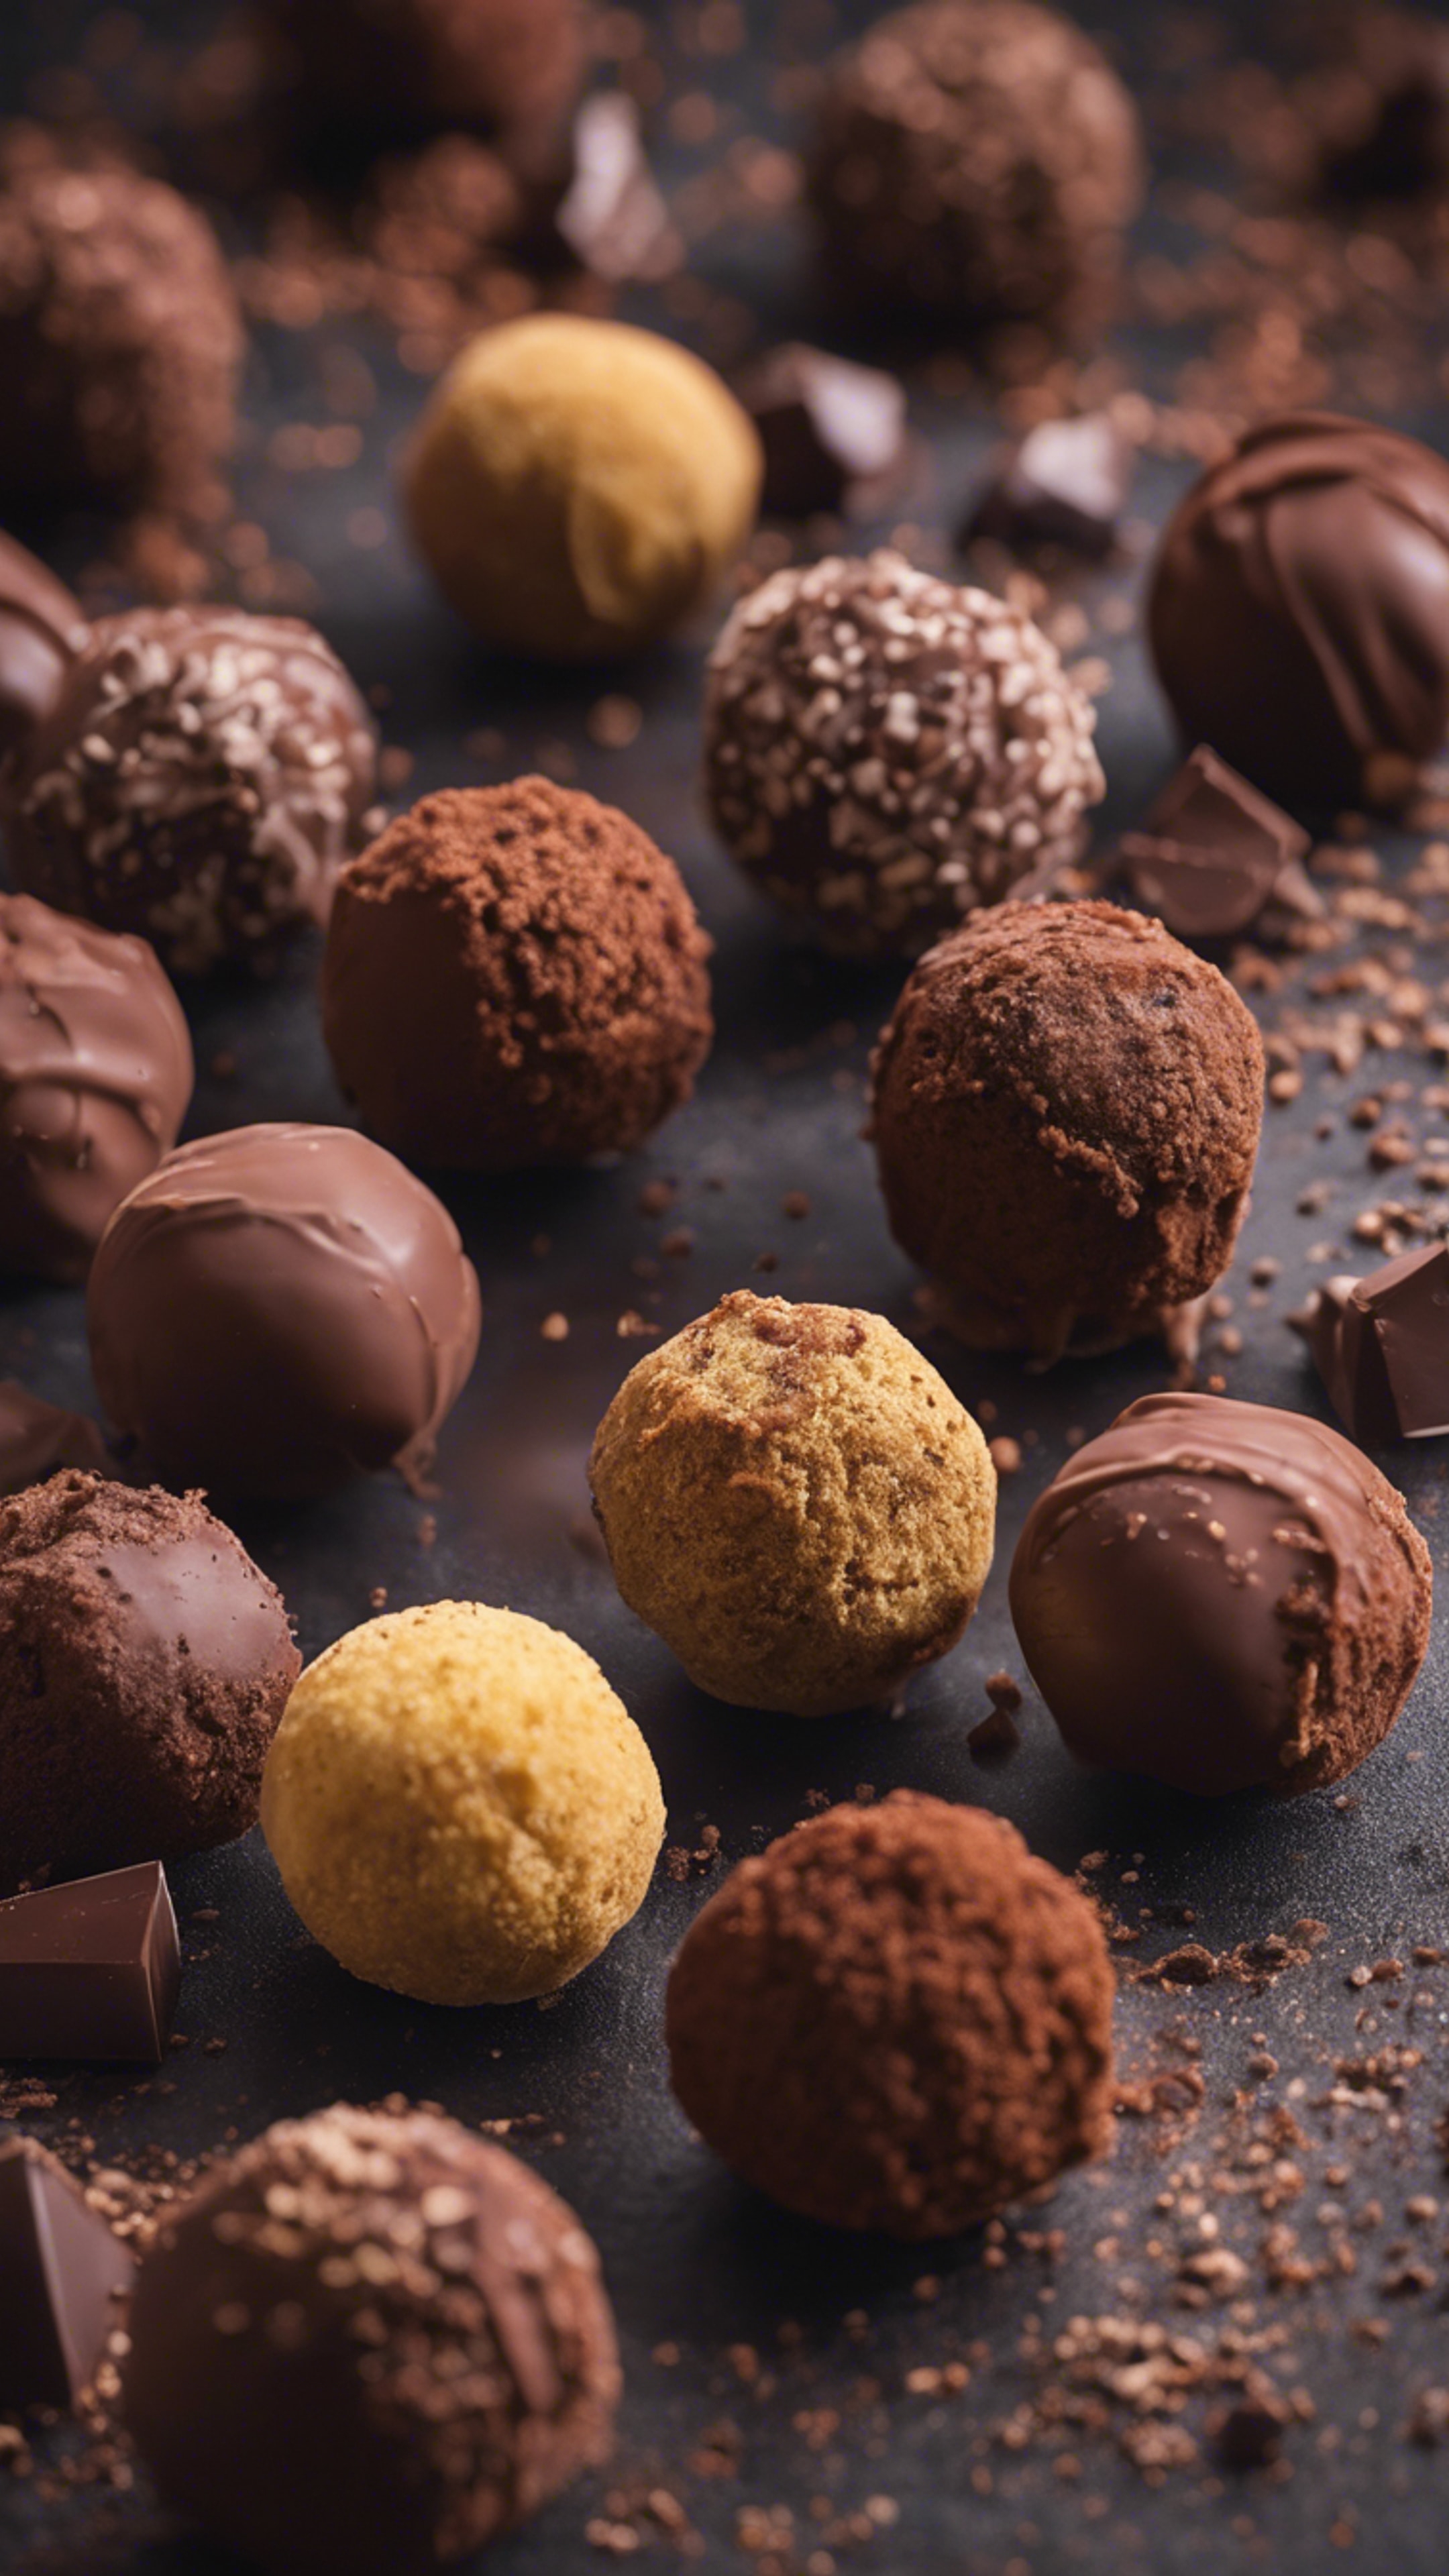 An assortment of delicious, delectable brown chocolate truffles壁紙[070a36241272450fb9f4]